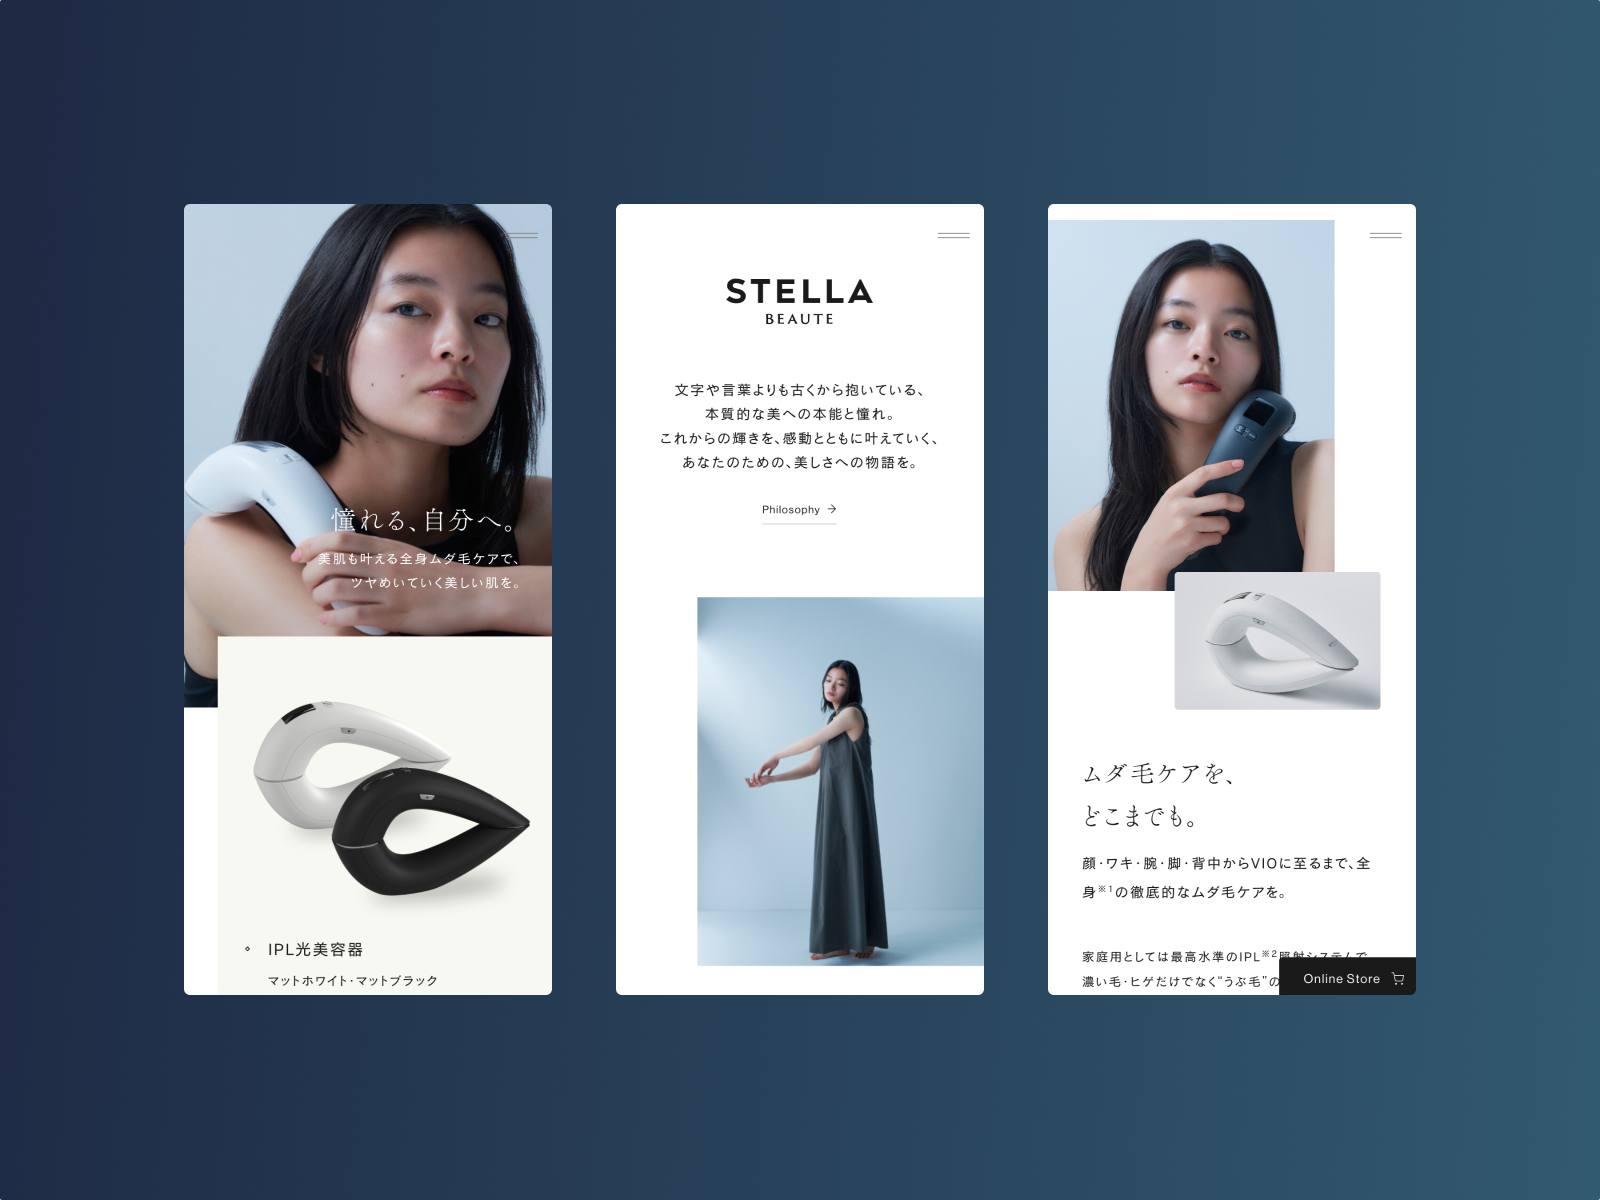 STELLA BEAUTE - Awwwards Honorable Mention